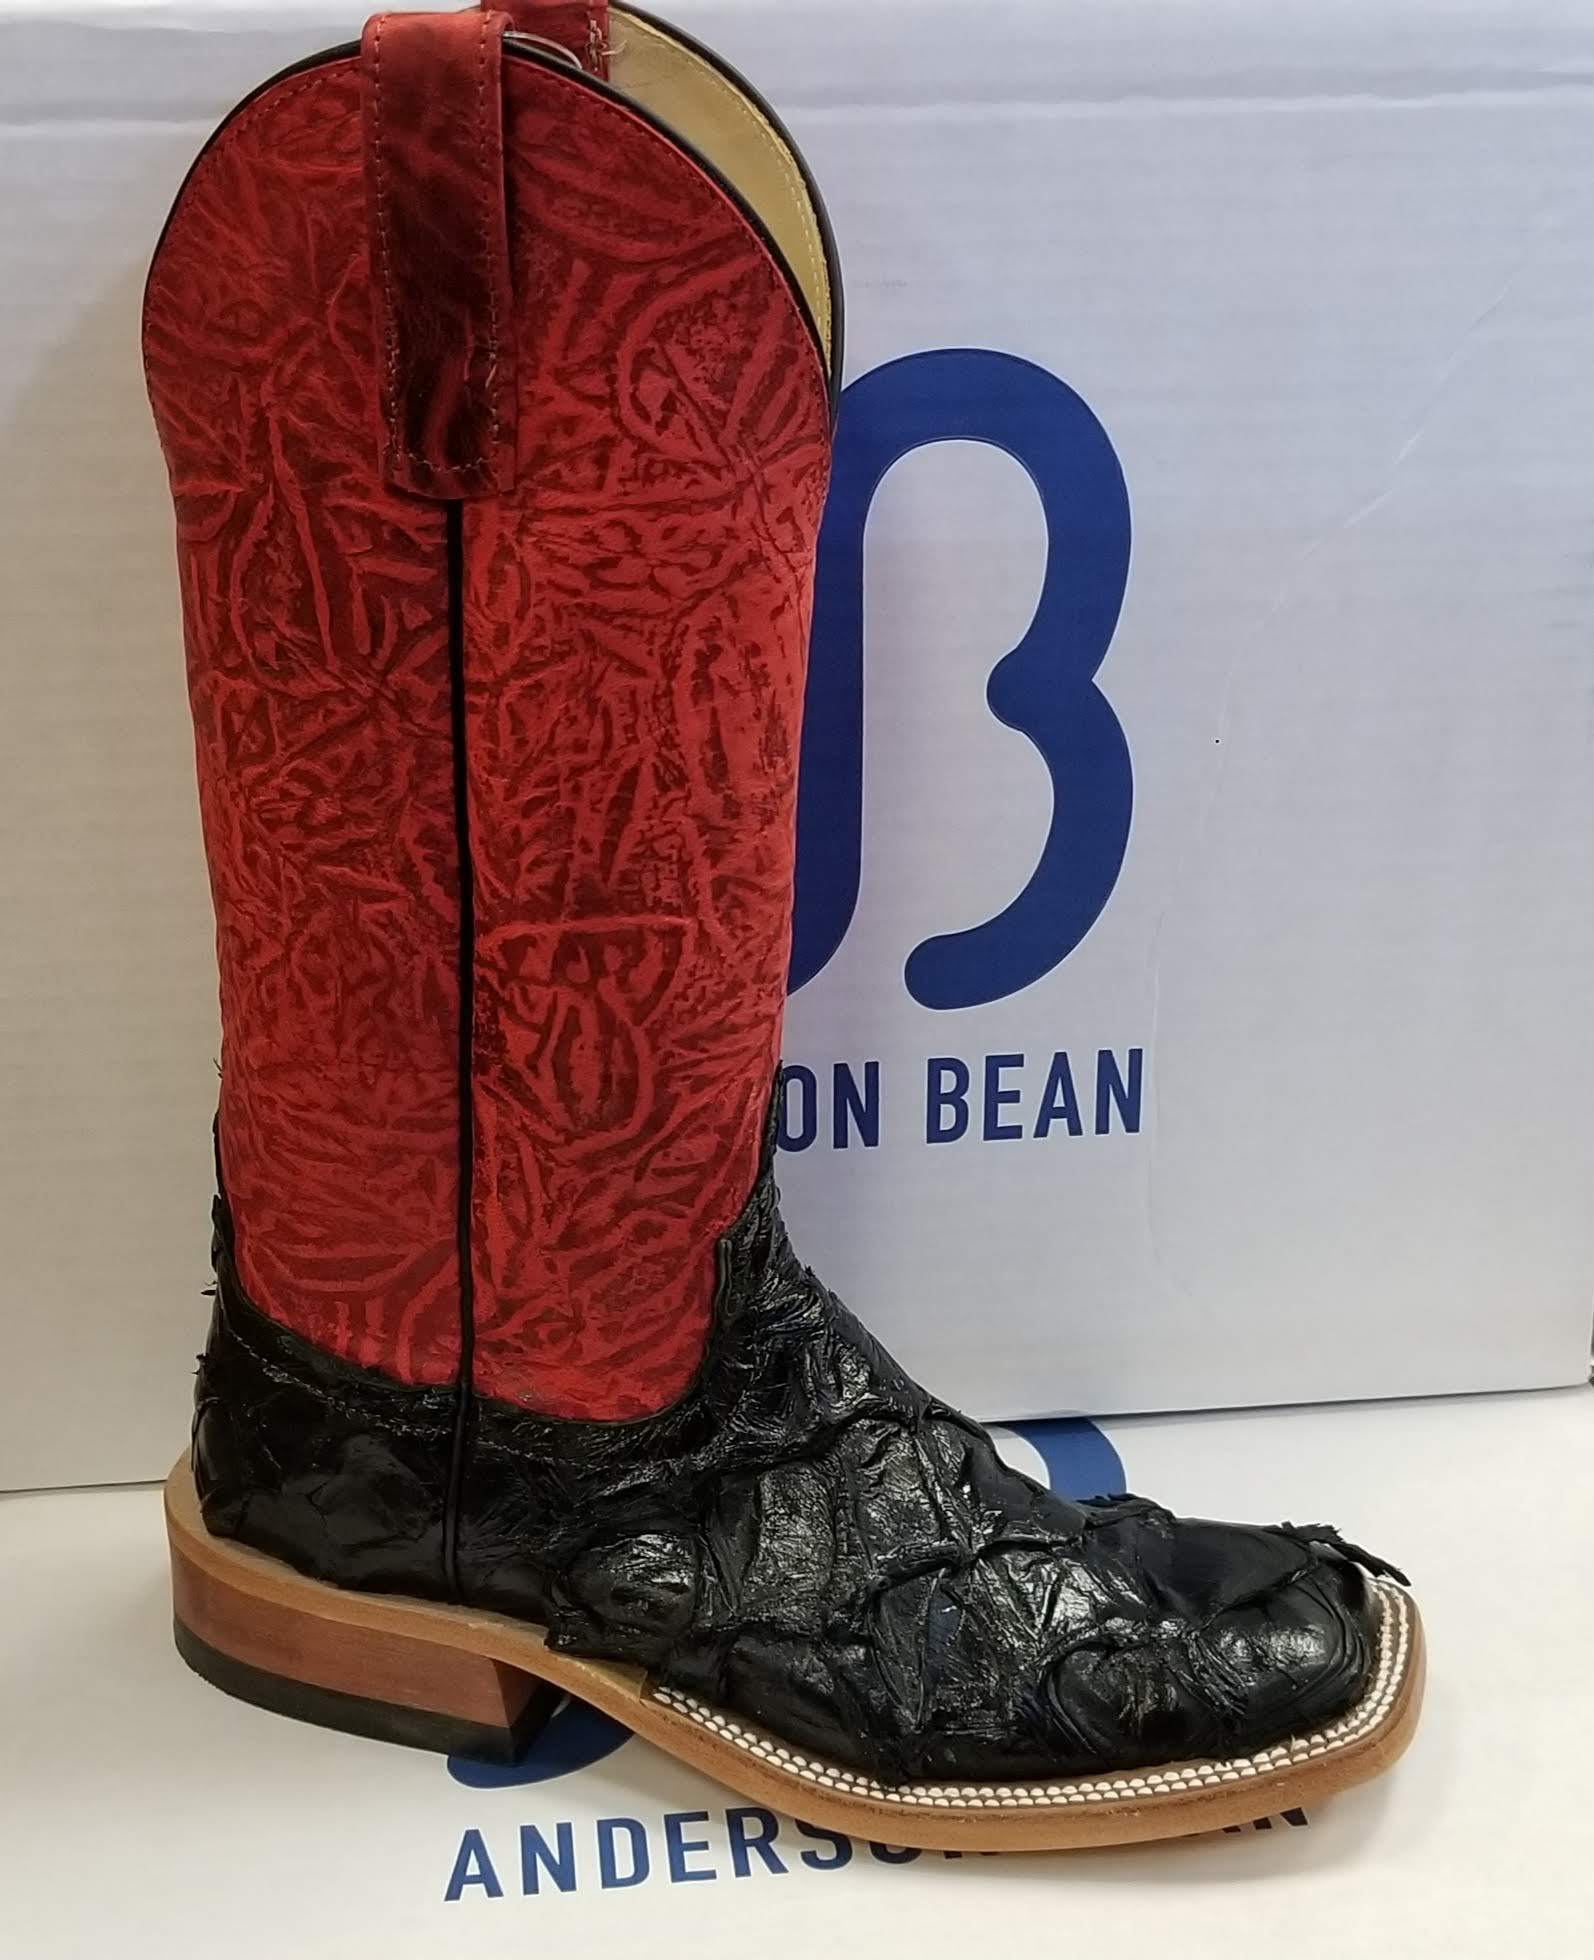 ladies anderson bean boots